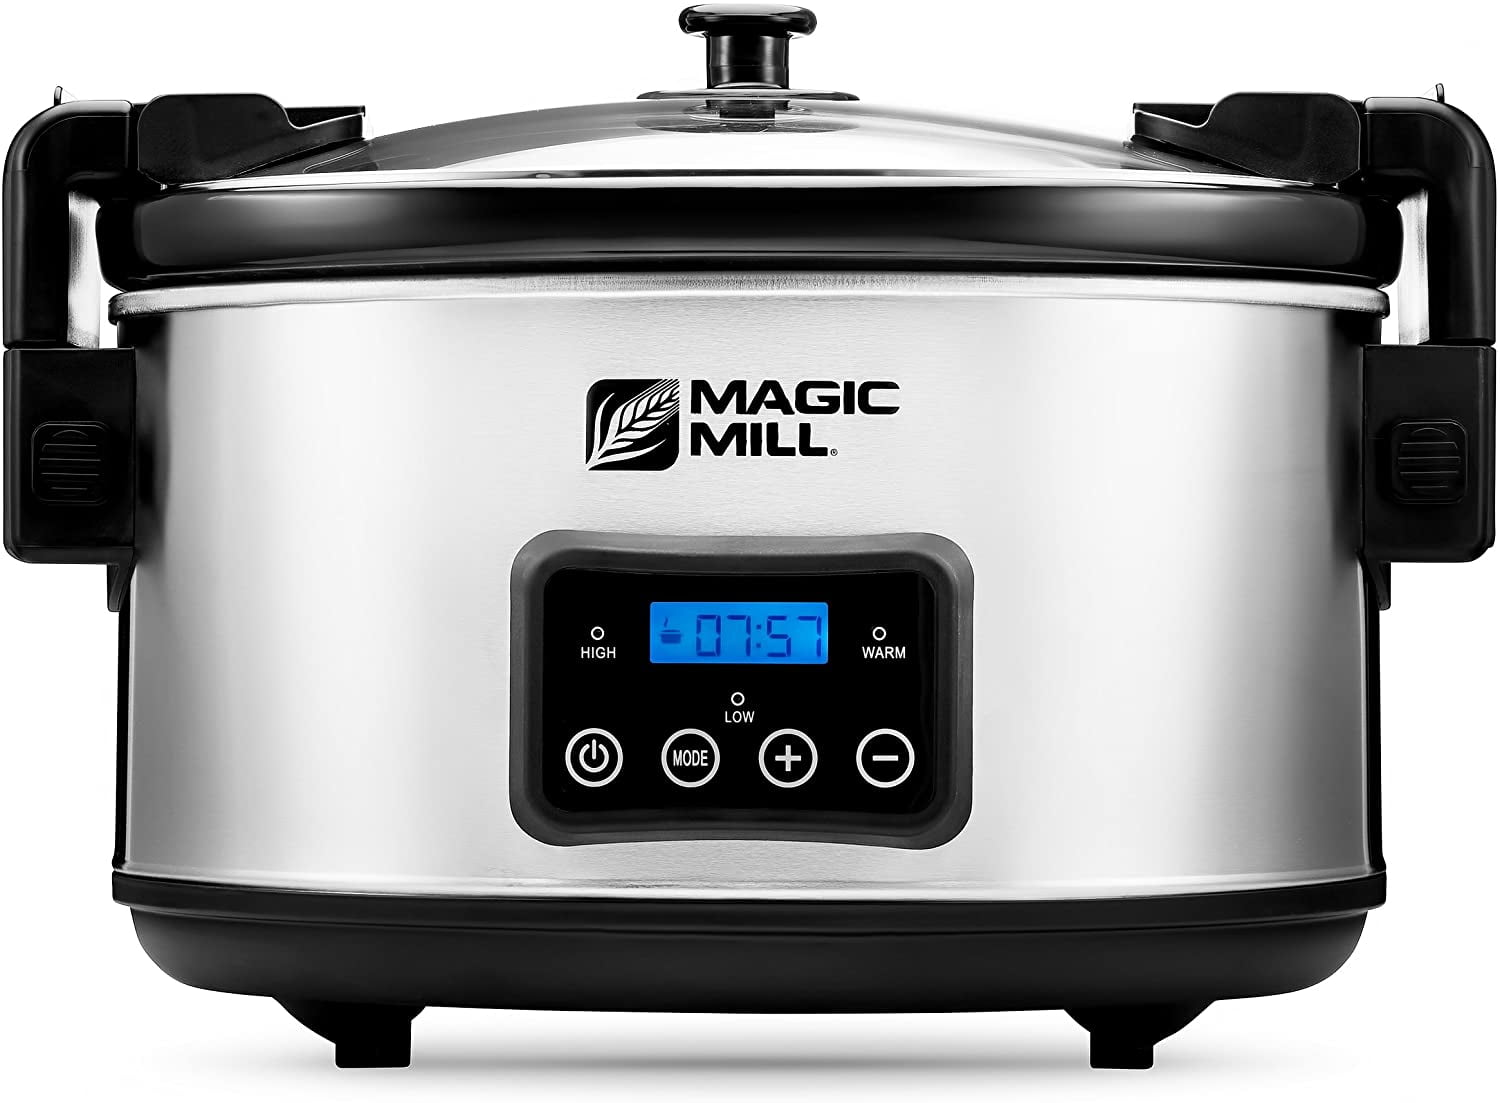 Slow Cookers: Your Personal Freedom Machine